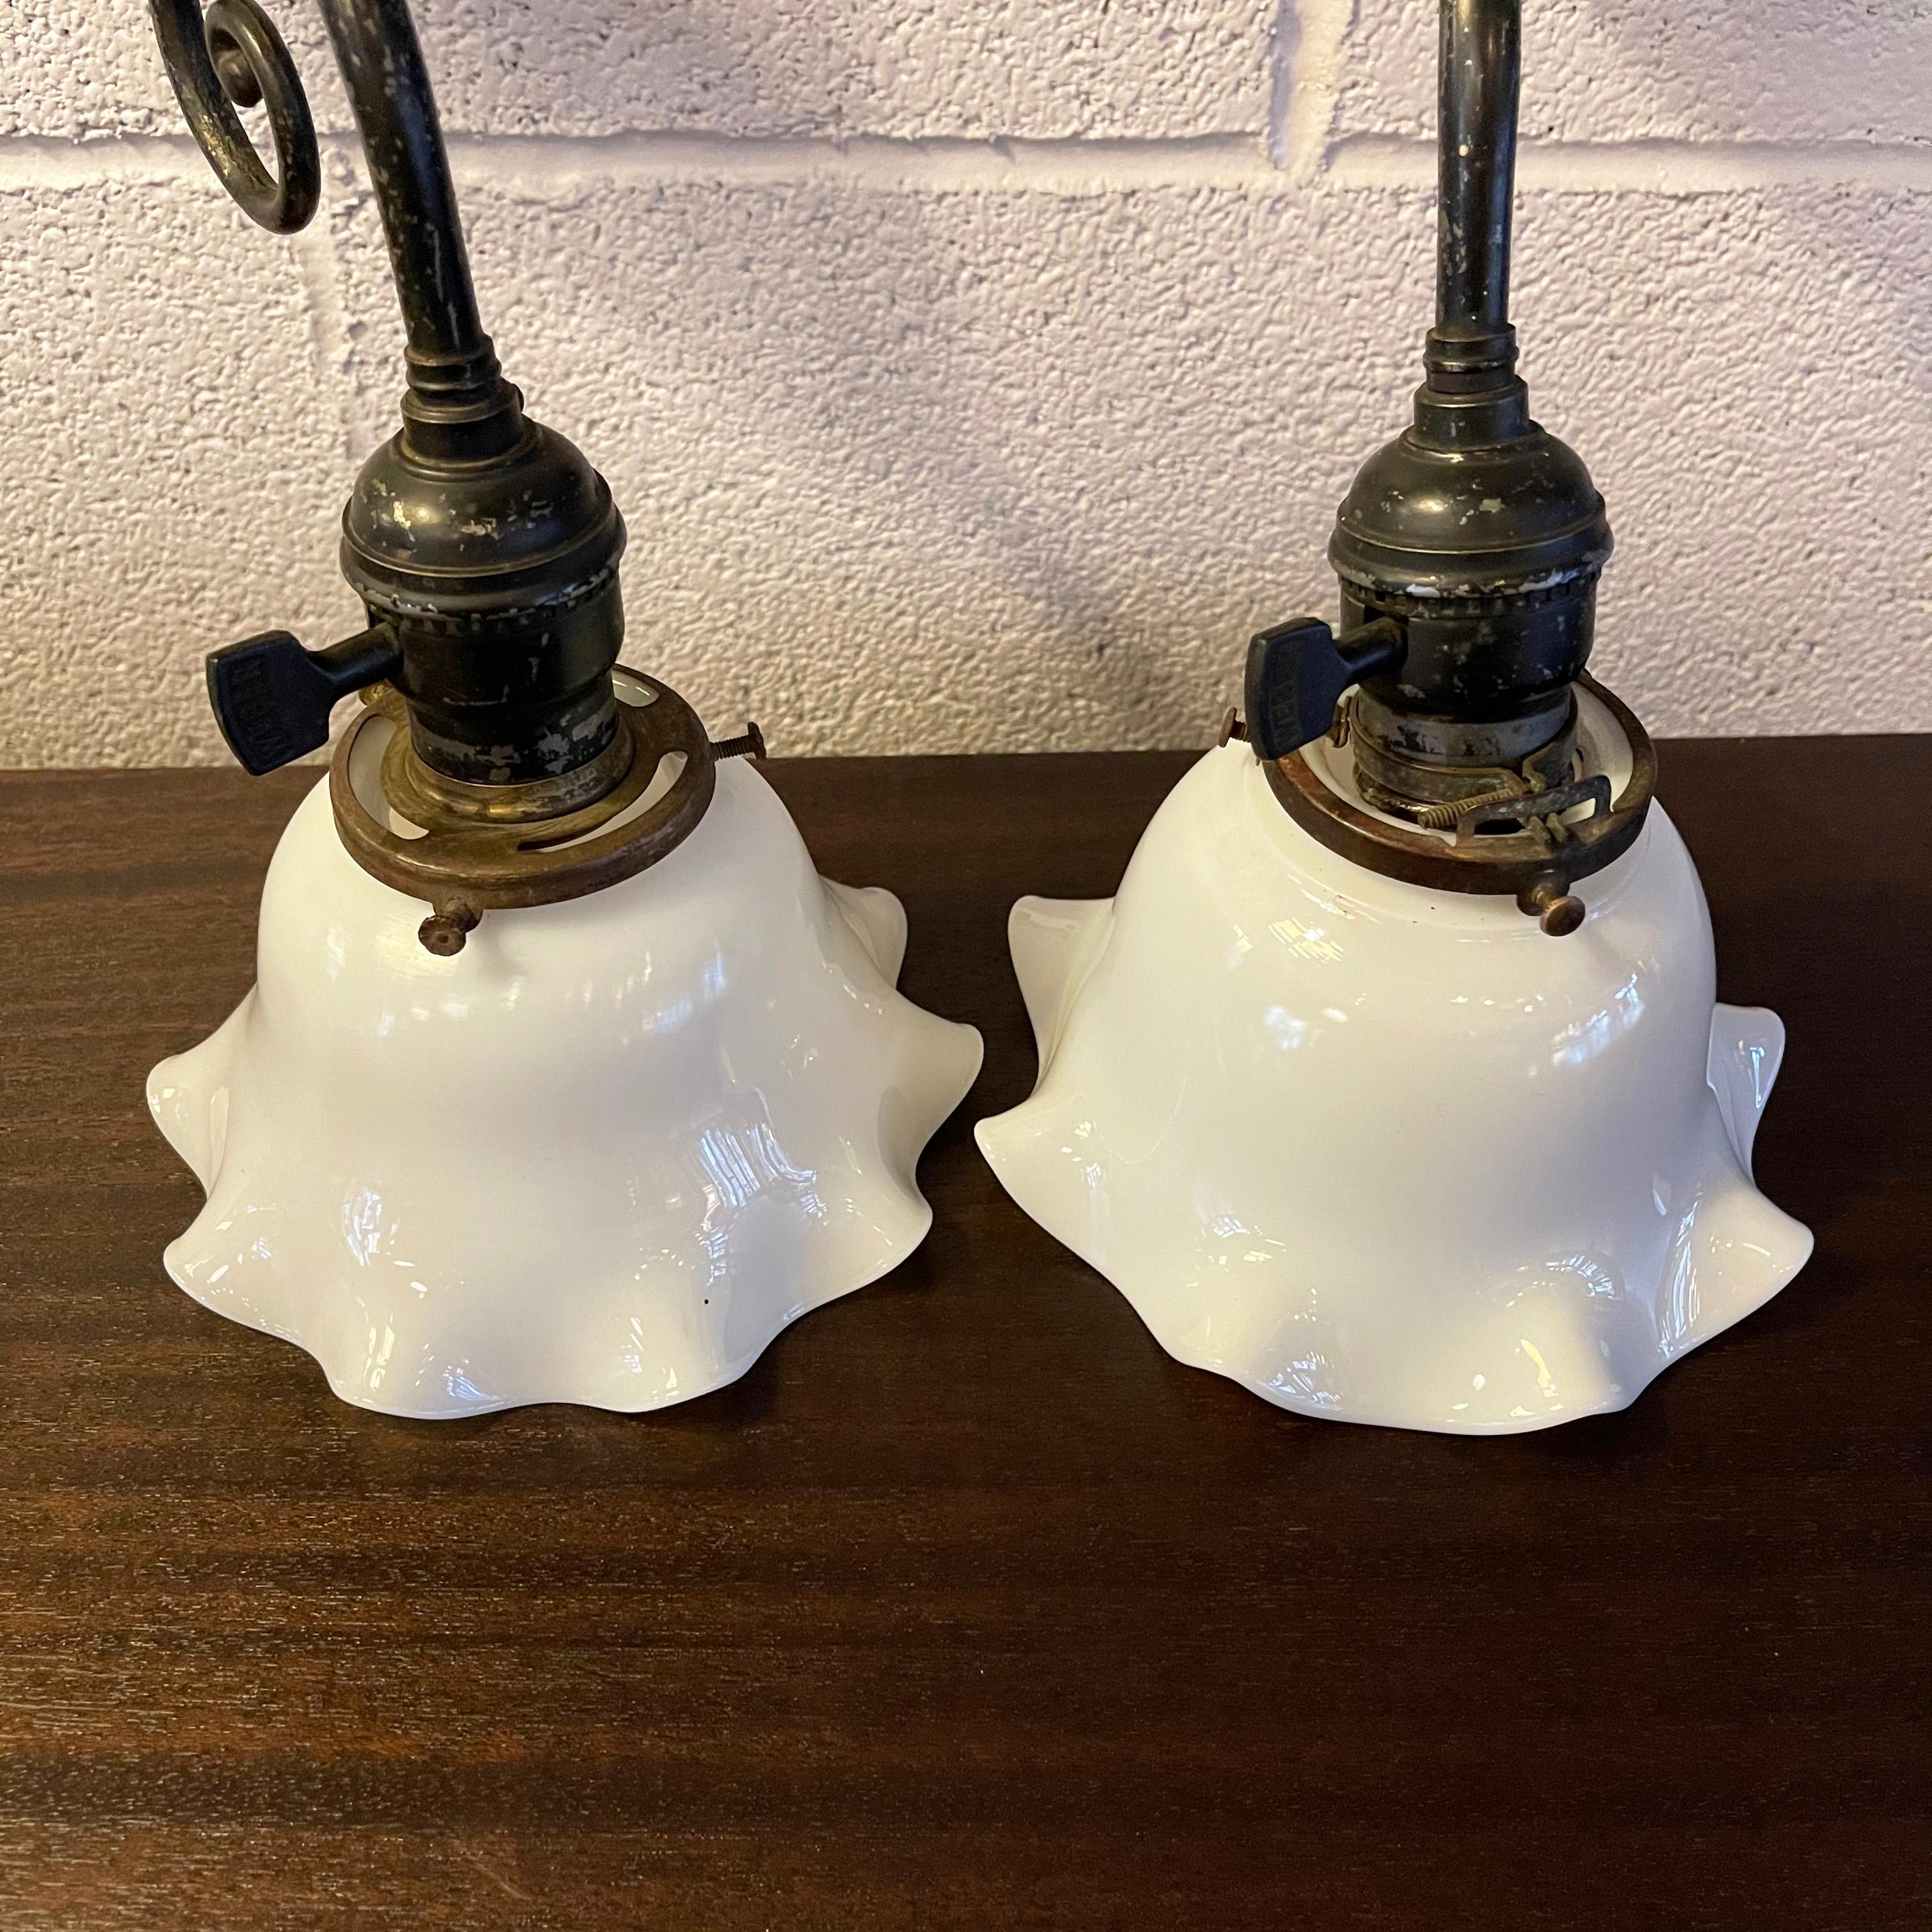 American Industrial Blackened Nickel and Milk Glass Wall Sconce Lamps For Sale